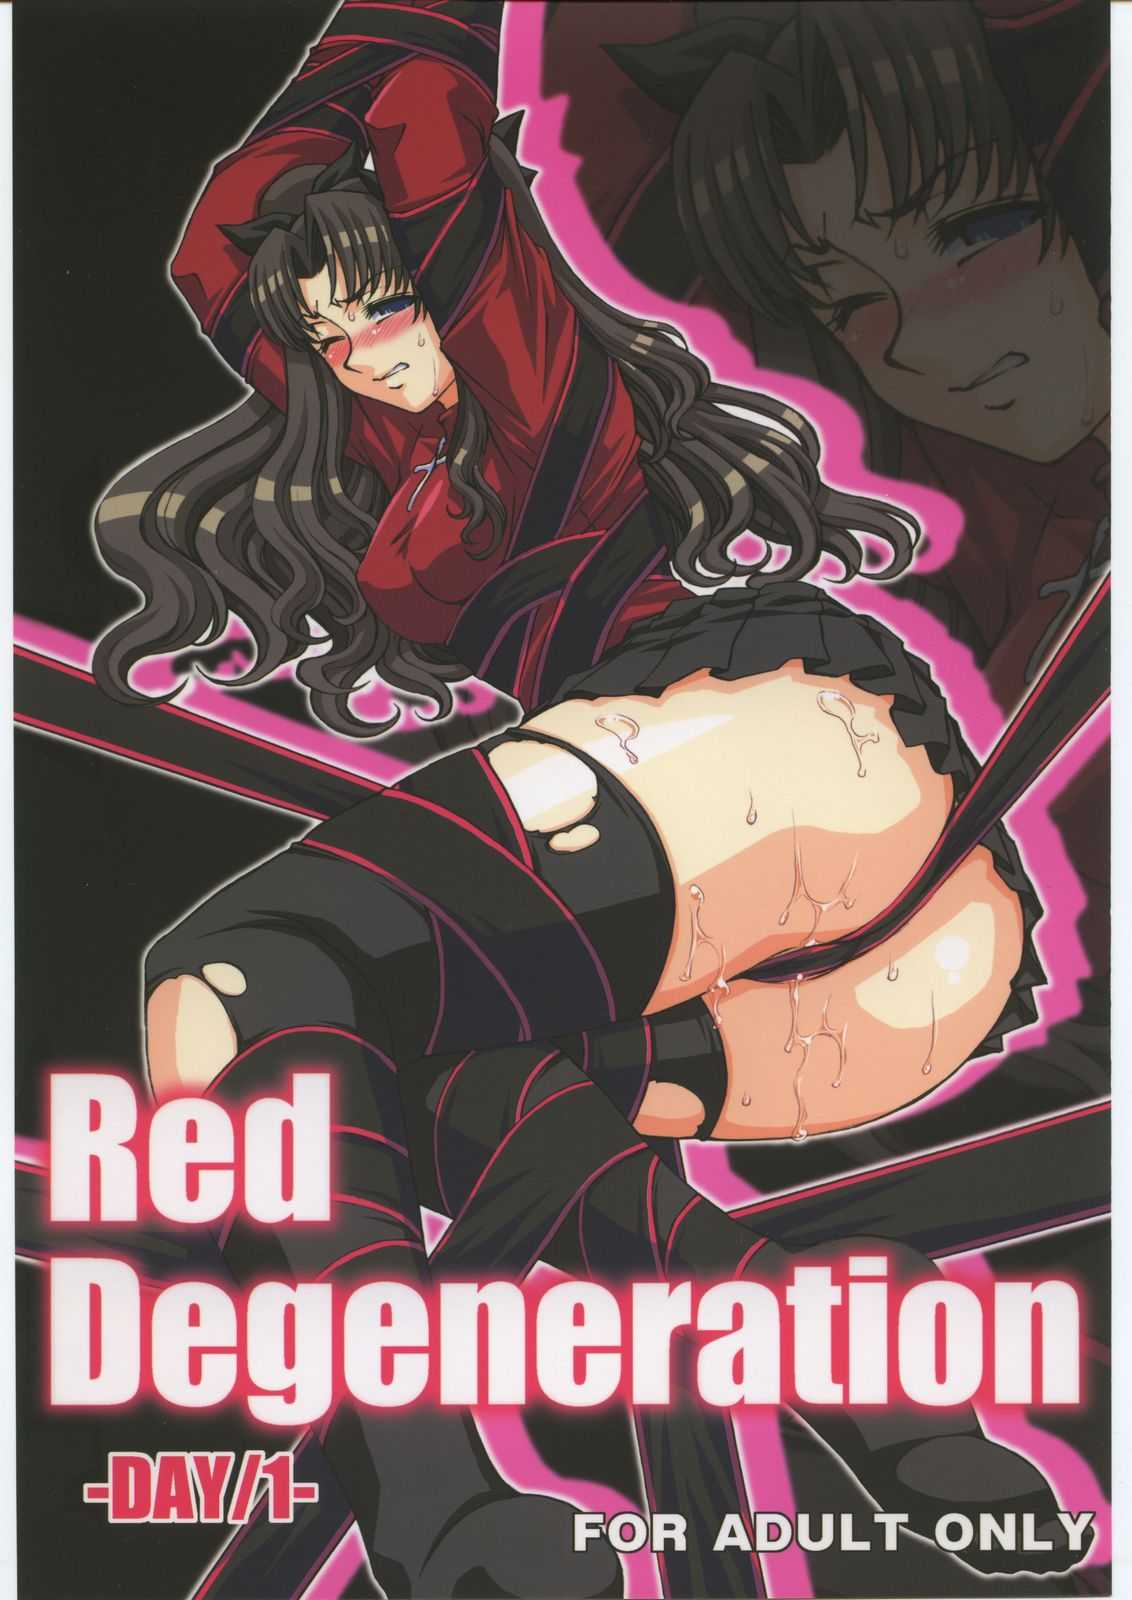 [H.B(B-RIVER)] Red Degeneration DAY1 (Fate stay night) 